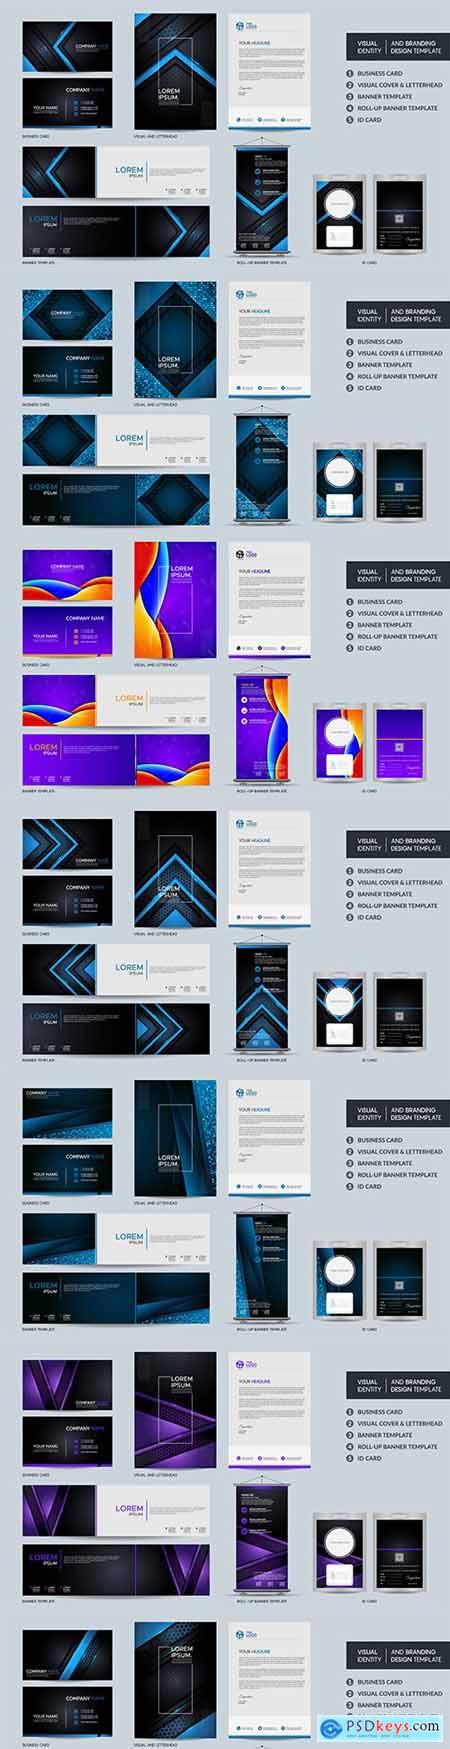 Modern stationery and visual style template